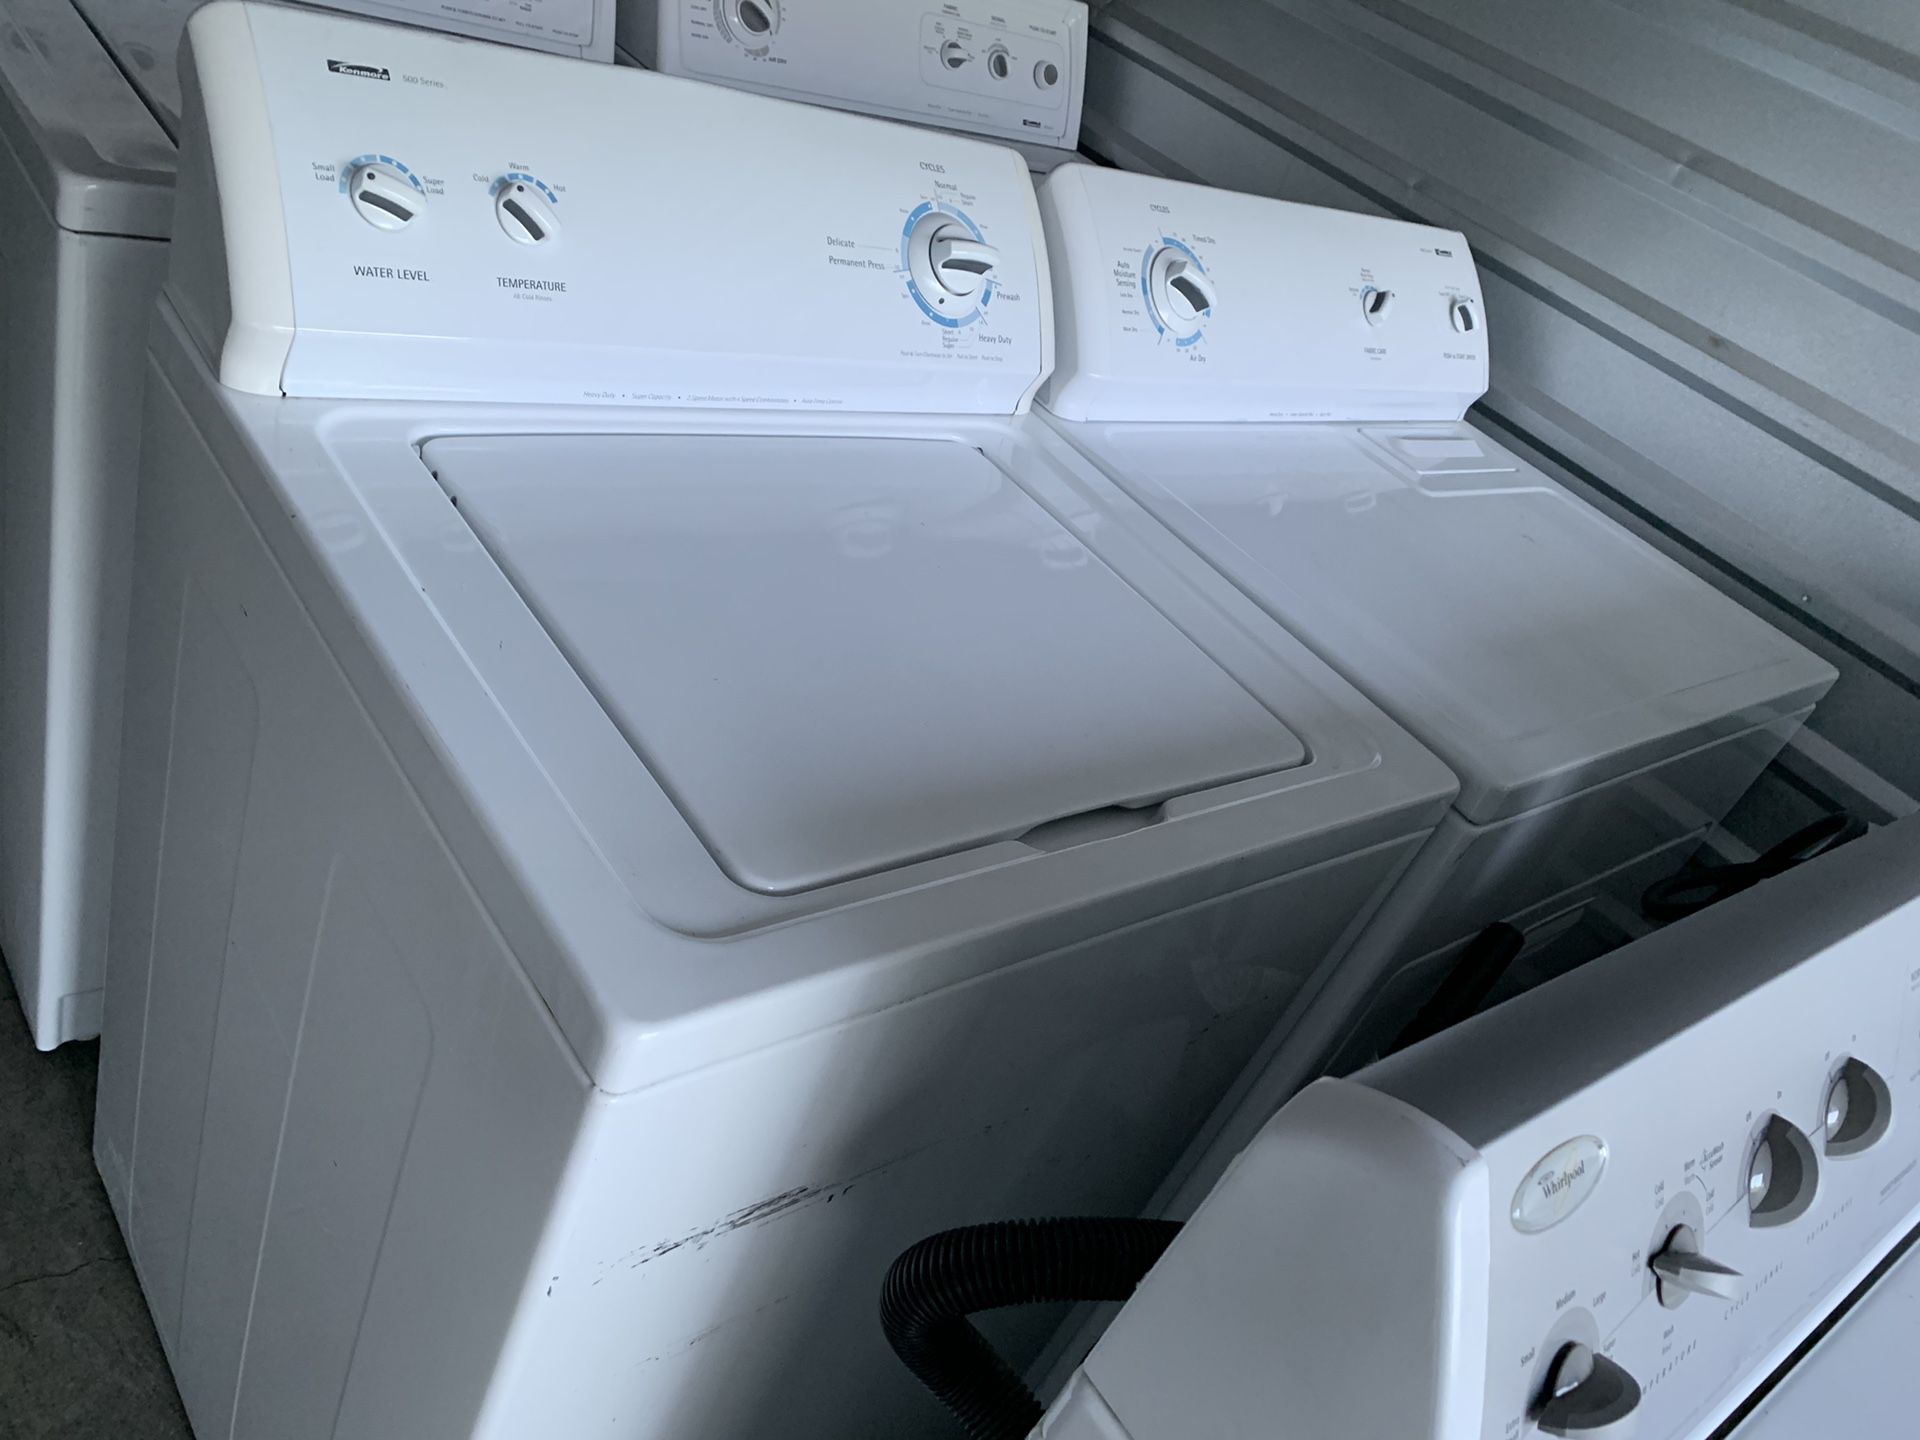 Kenmore washer and Dryer